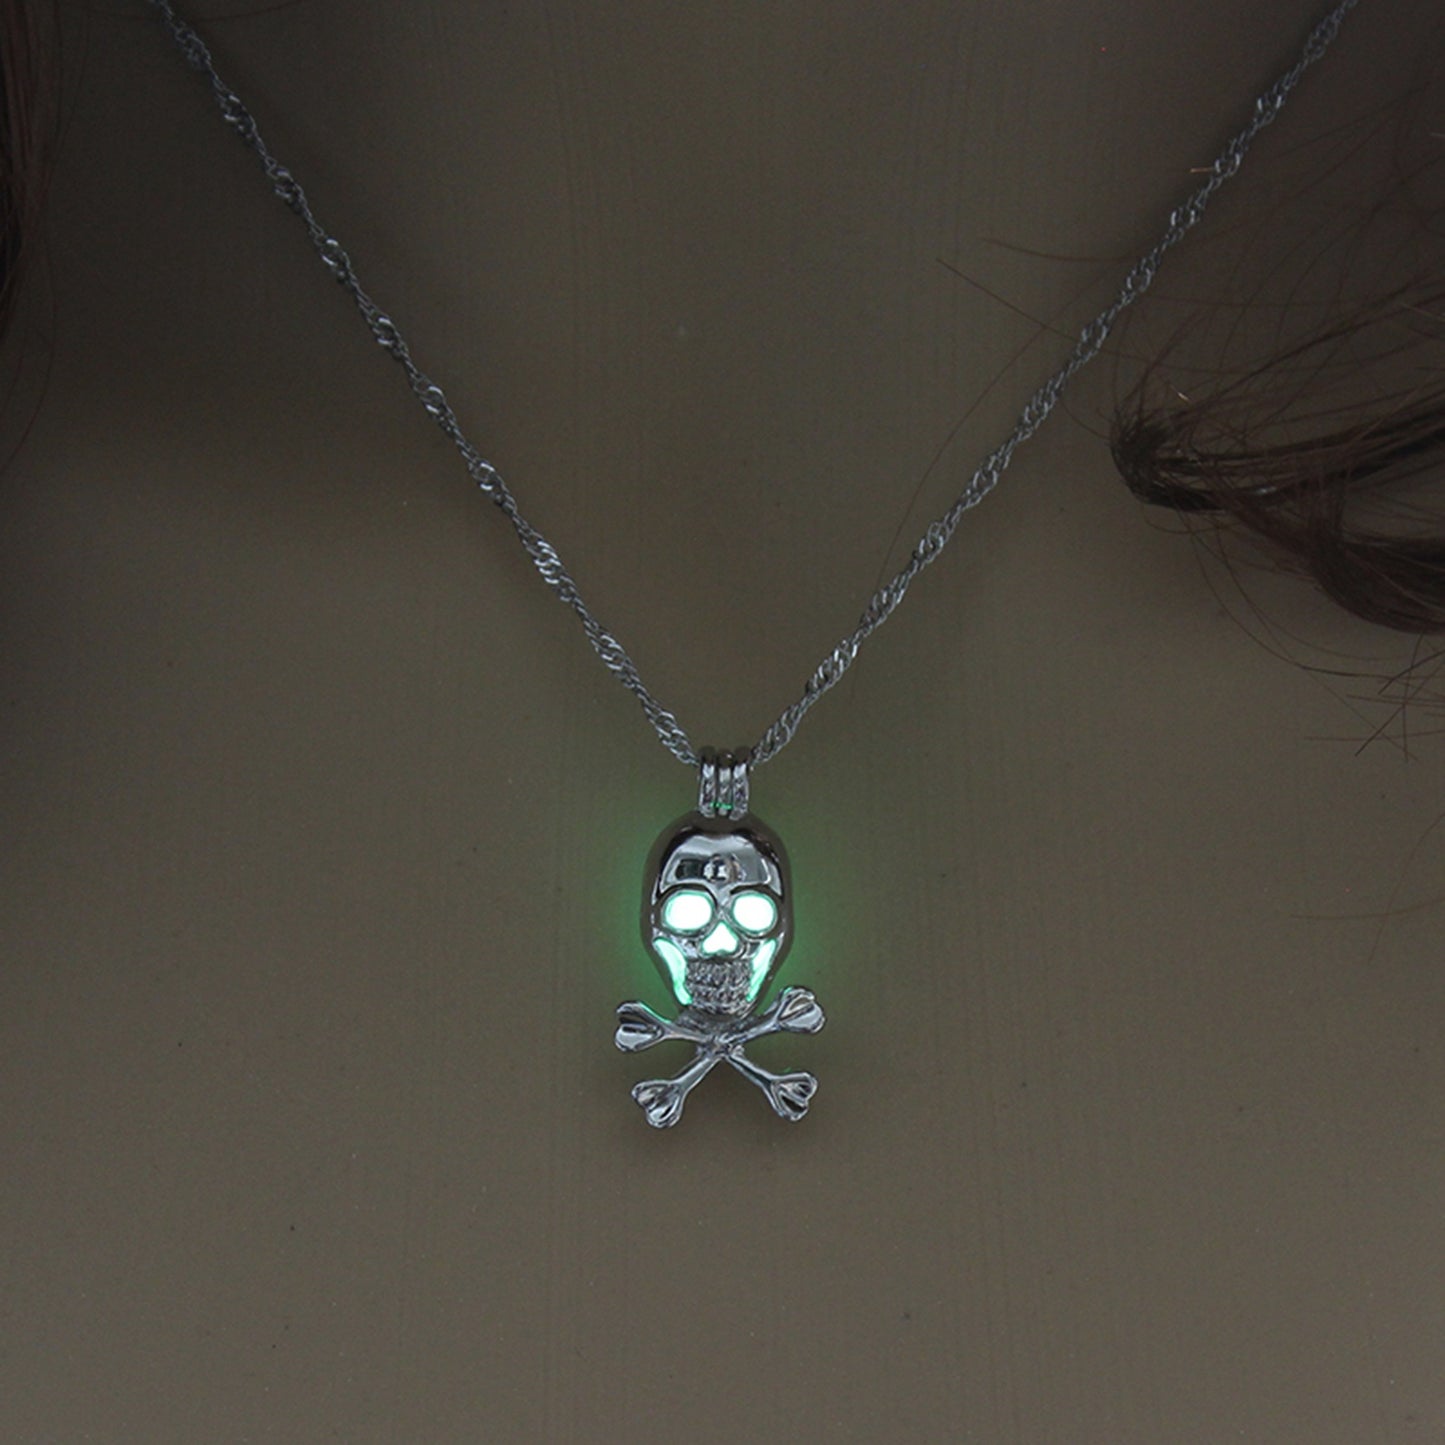 Punk Style Skull Pendant Necklace Luminous Jewelry Silver Color Chain Glow in the Dark Choker Statement Necklace For Women Gift